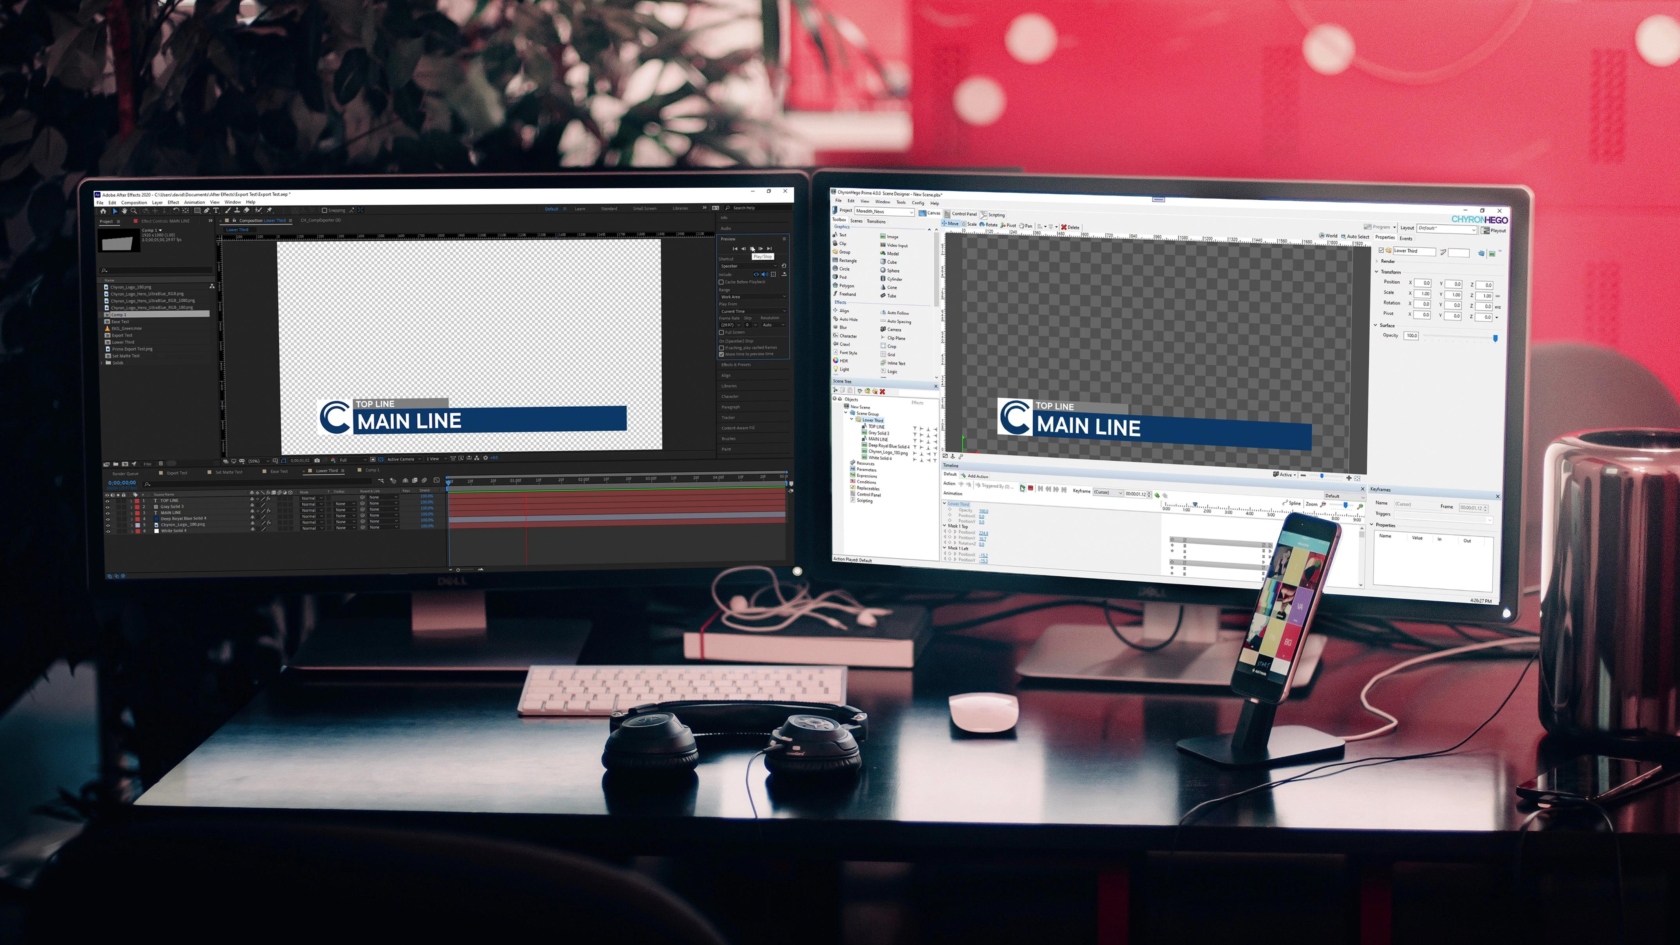 PRIME CG's motion graphic broadcast software offers timelines, a spline editor, and a full set of effects, available for keyframing for any LED studio set for live production.